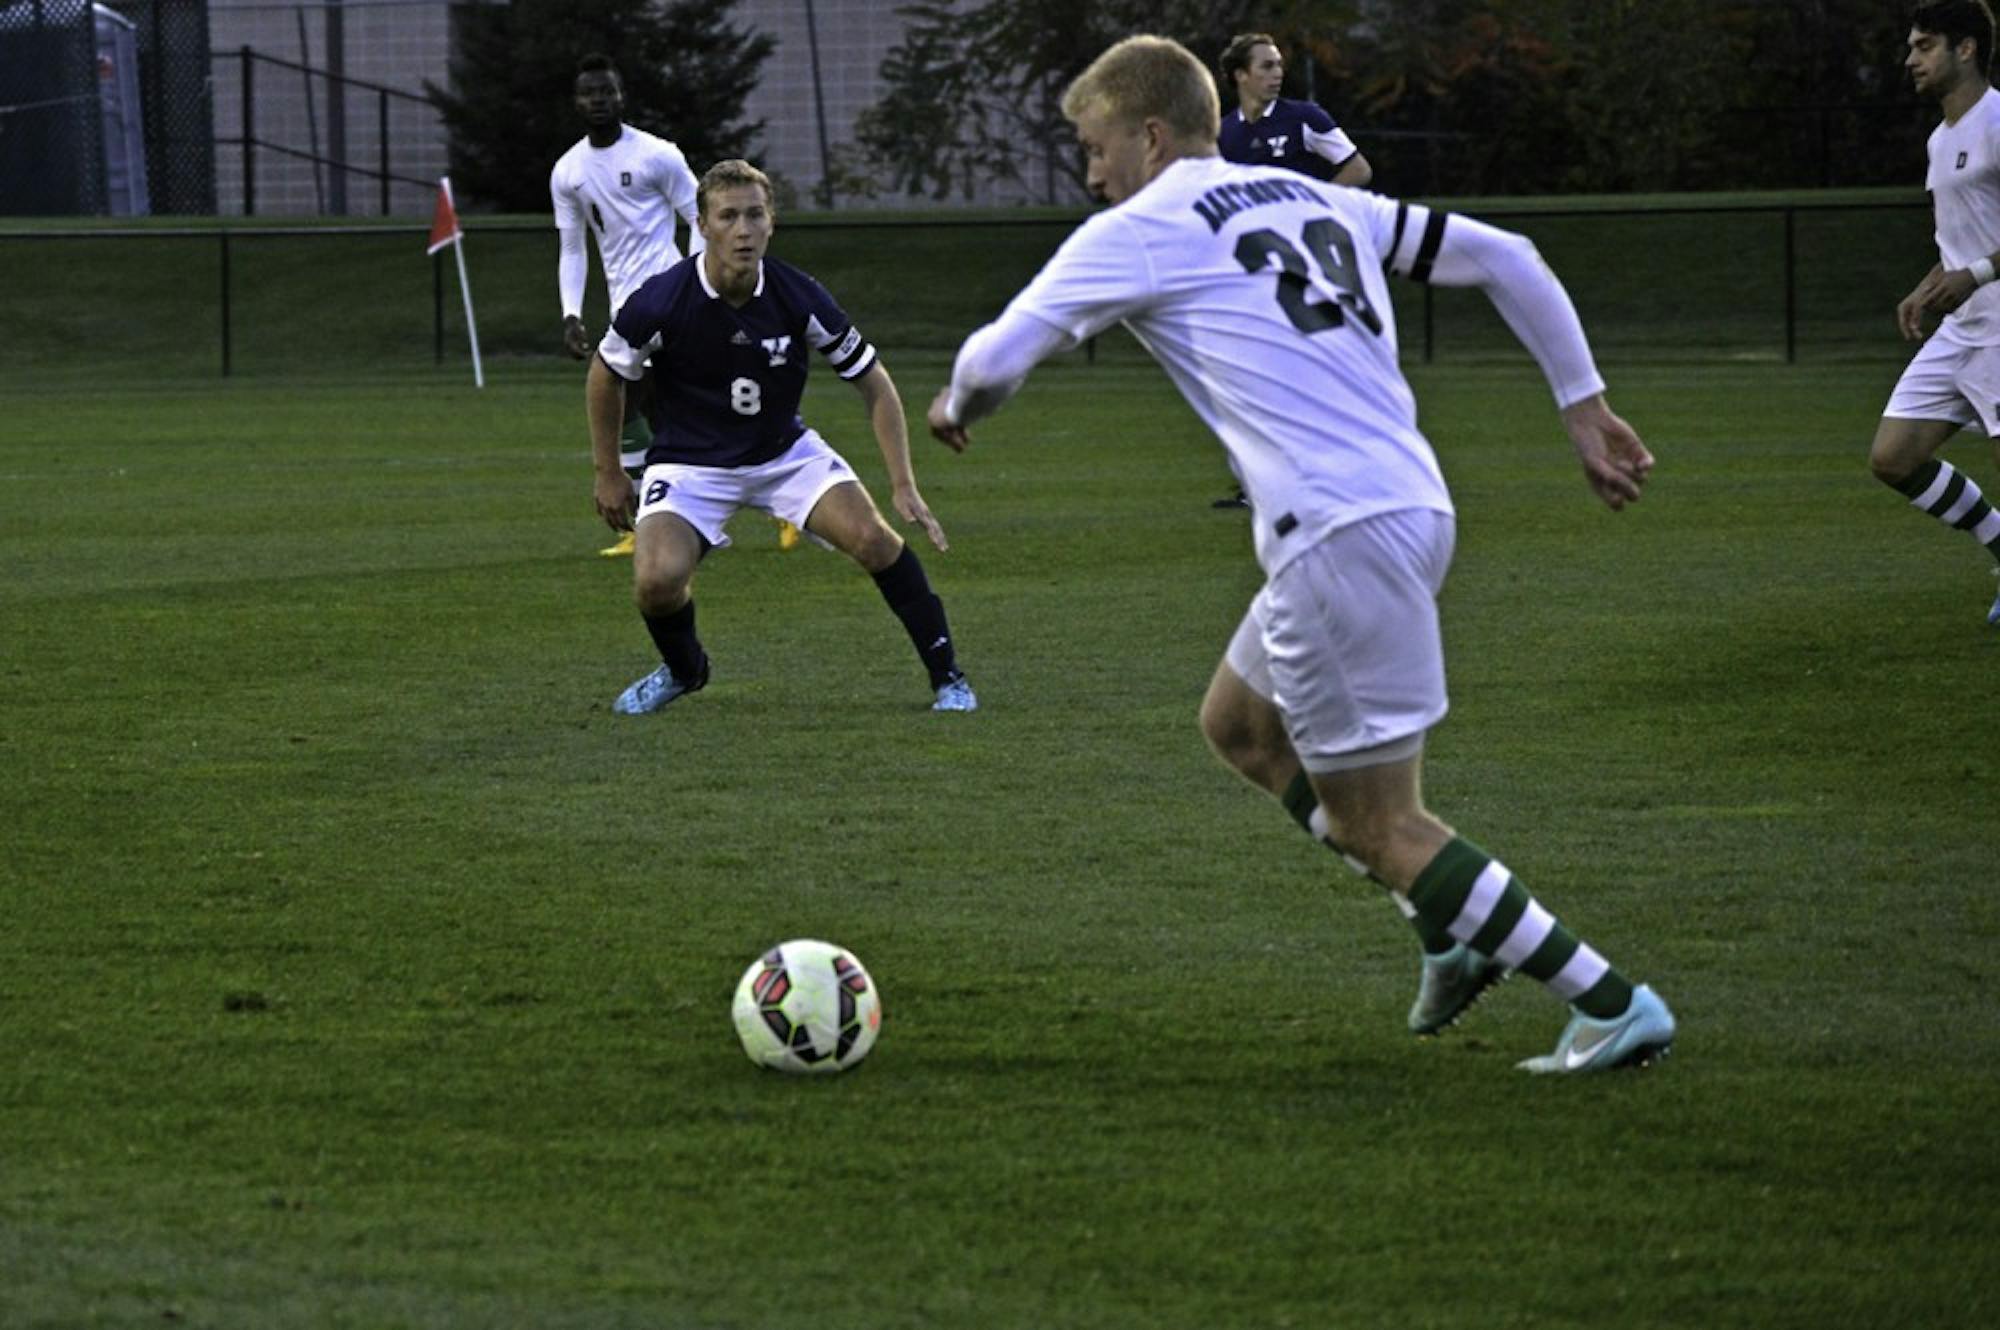 The men’s soccer team is looking to get back on track against the Lions.